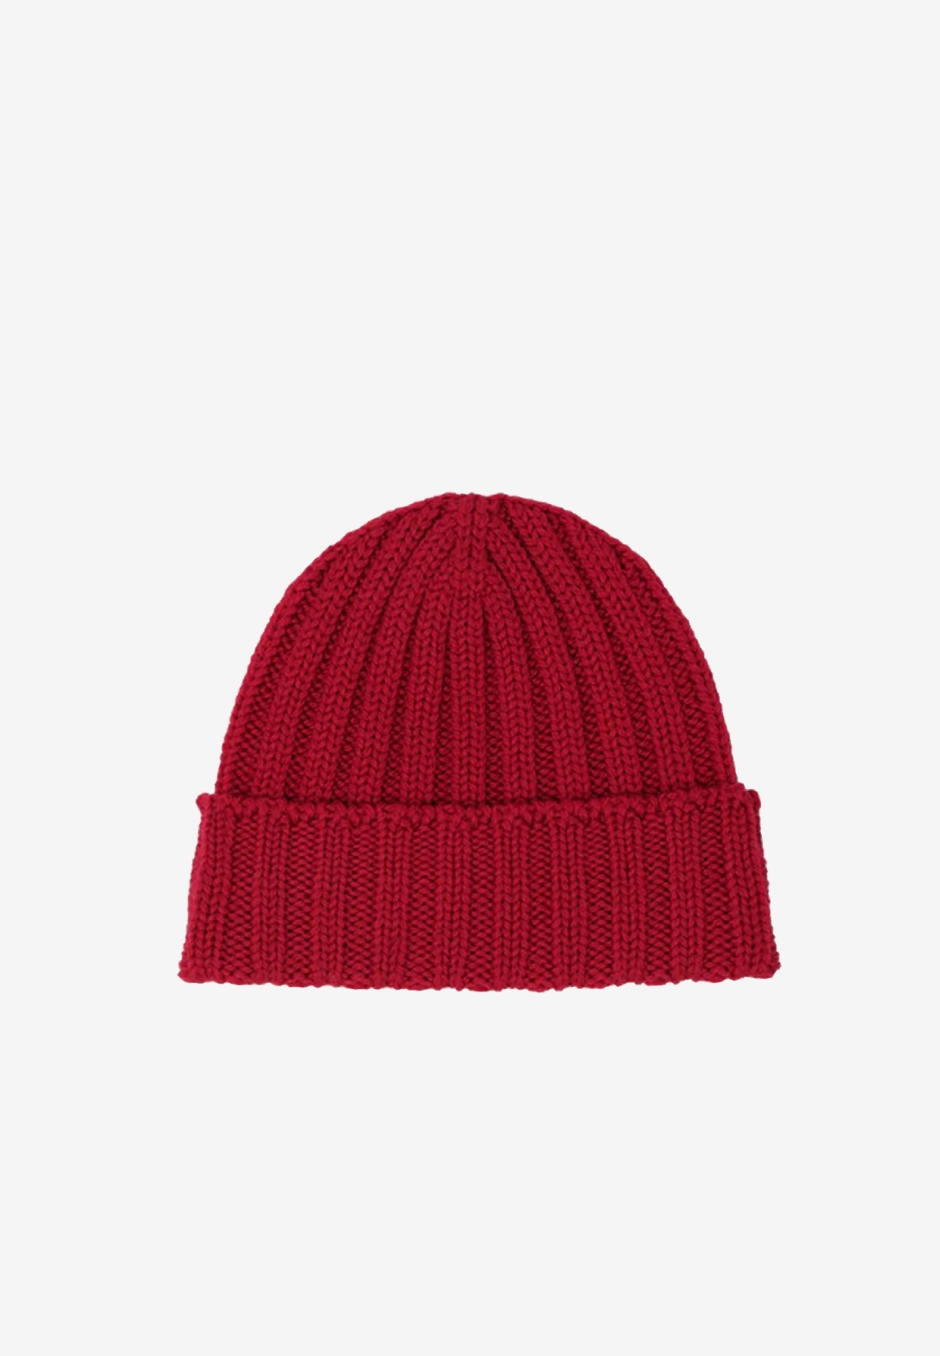 Another Aspect Beanie 1.0 Red